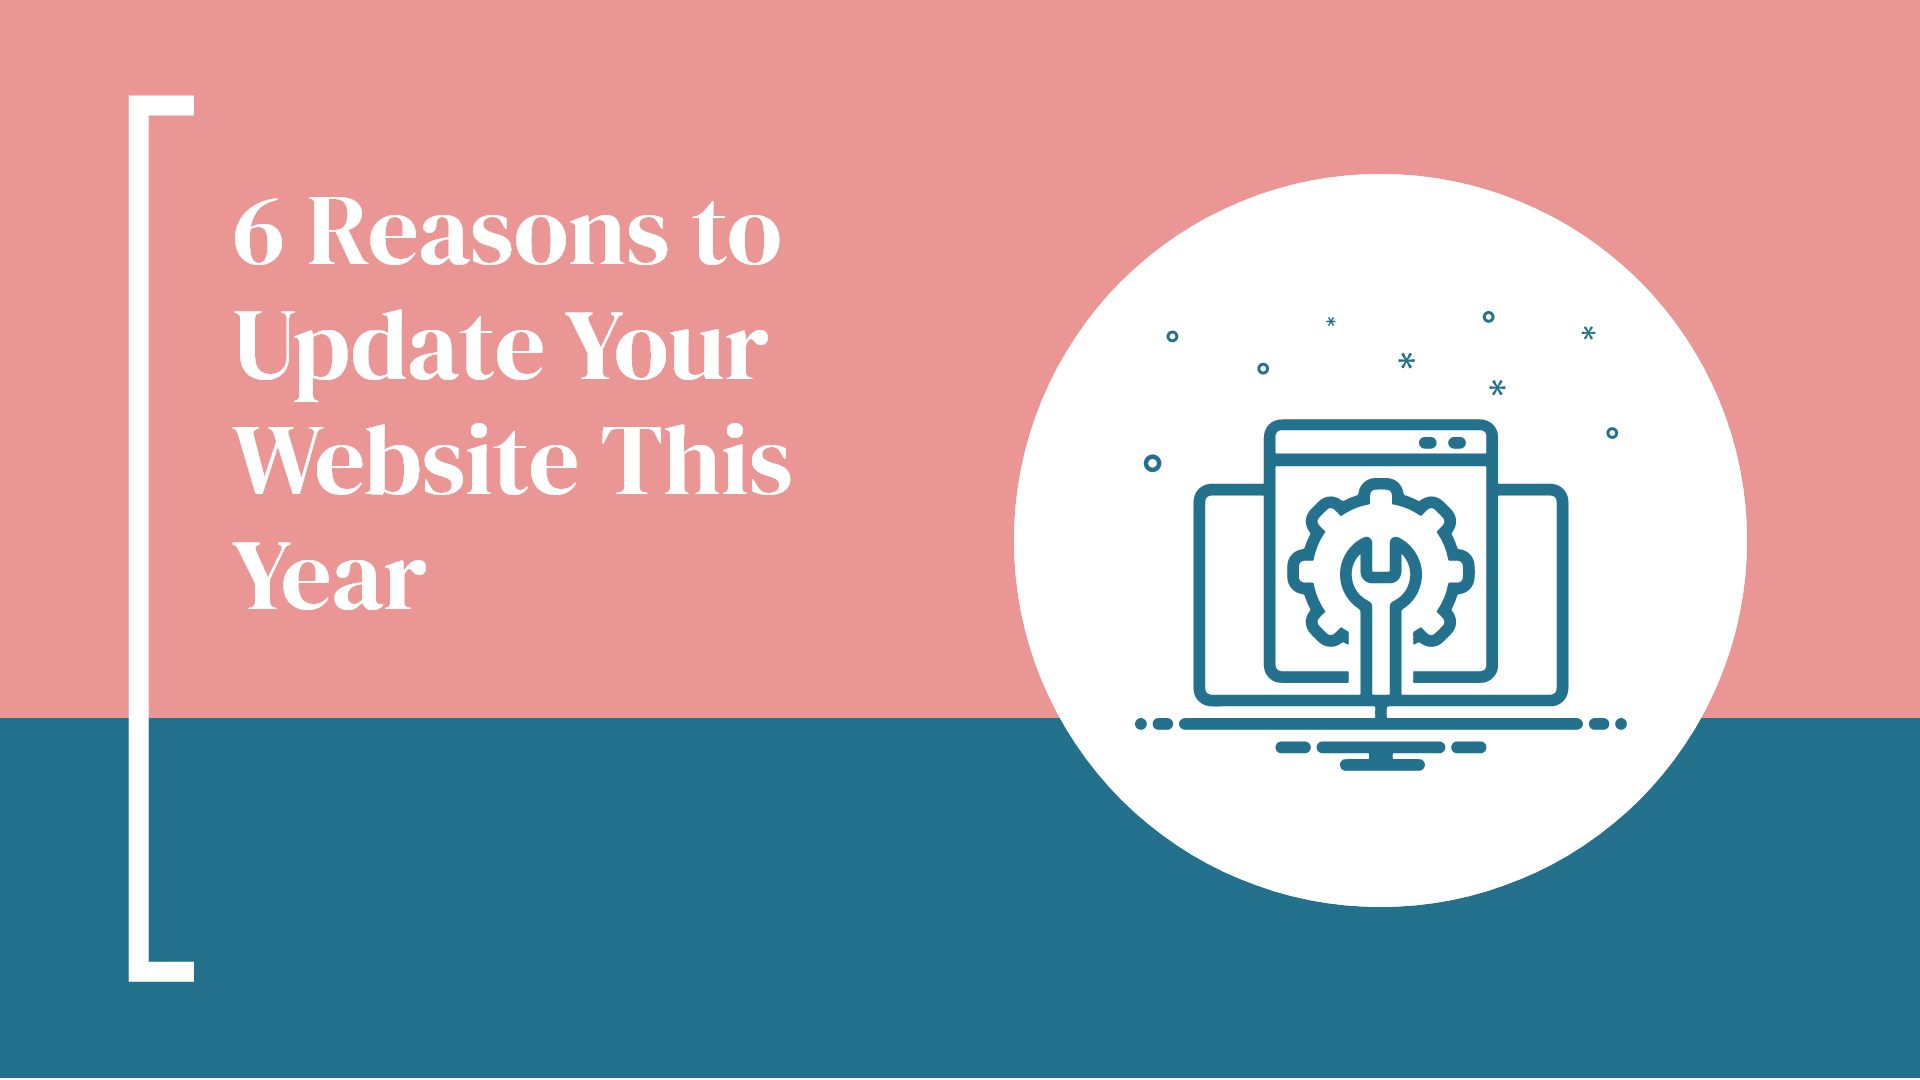 6 Reasons to Update Your Website This Year